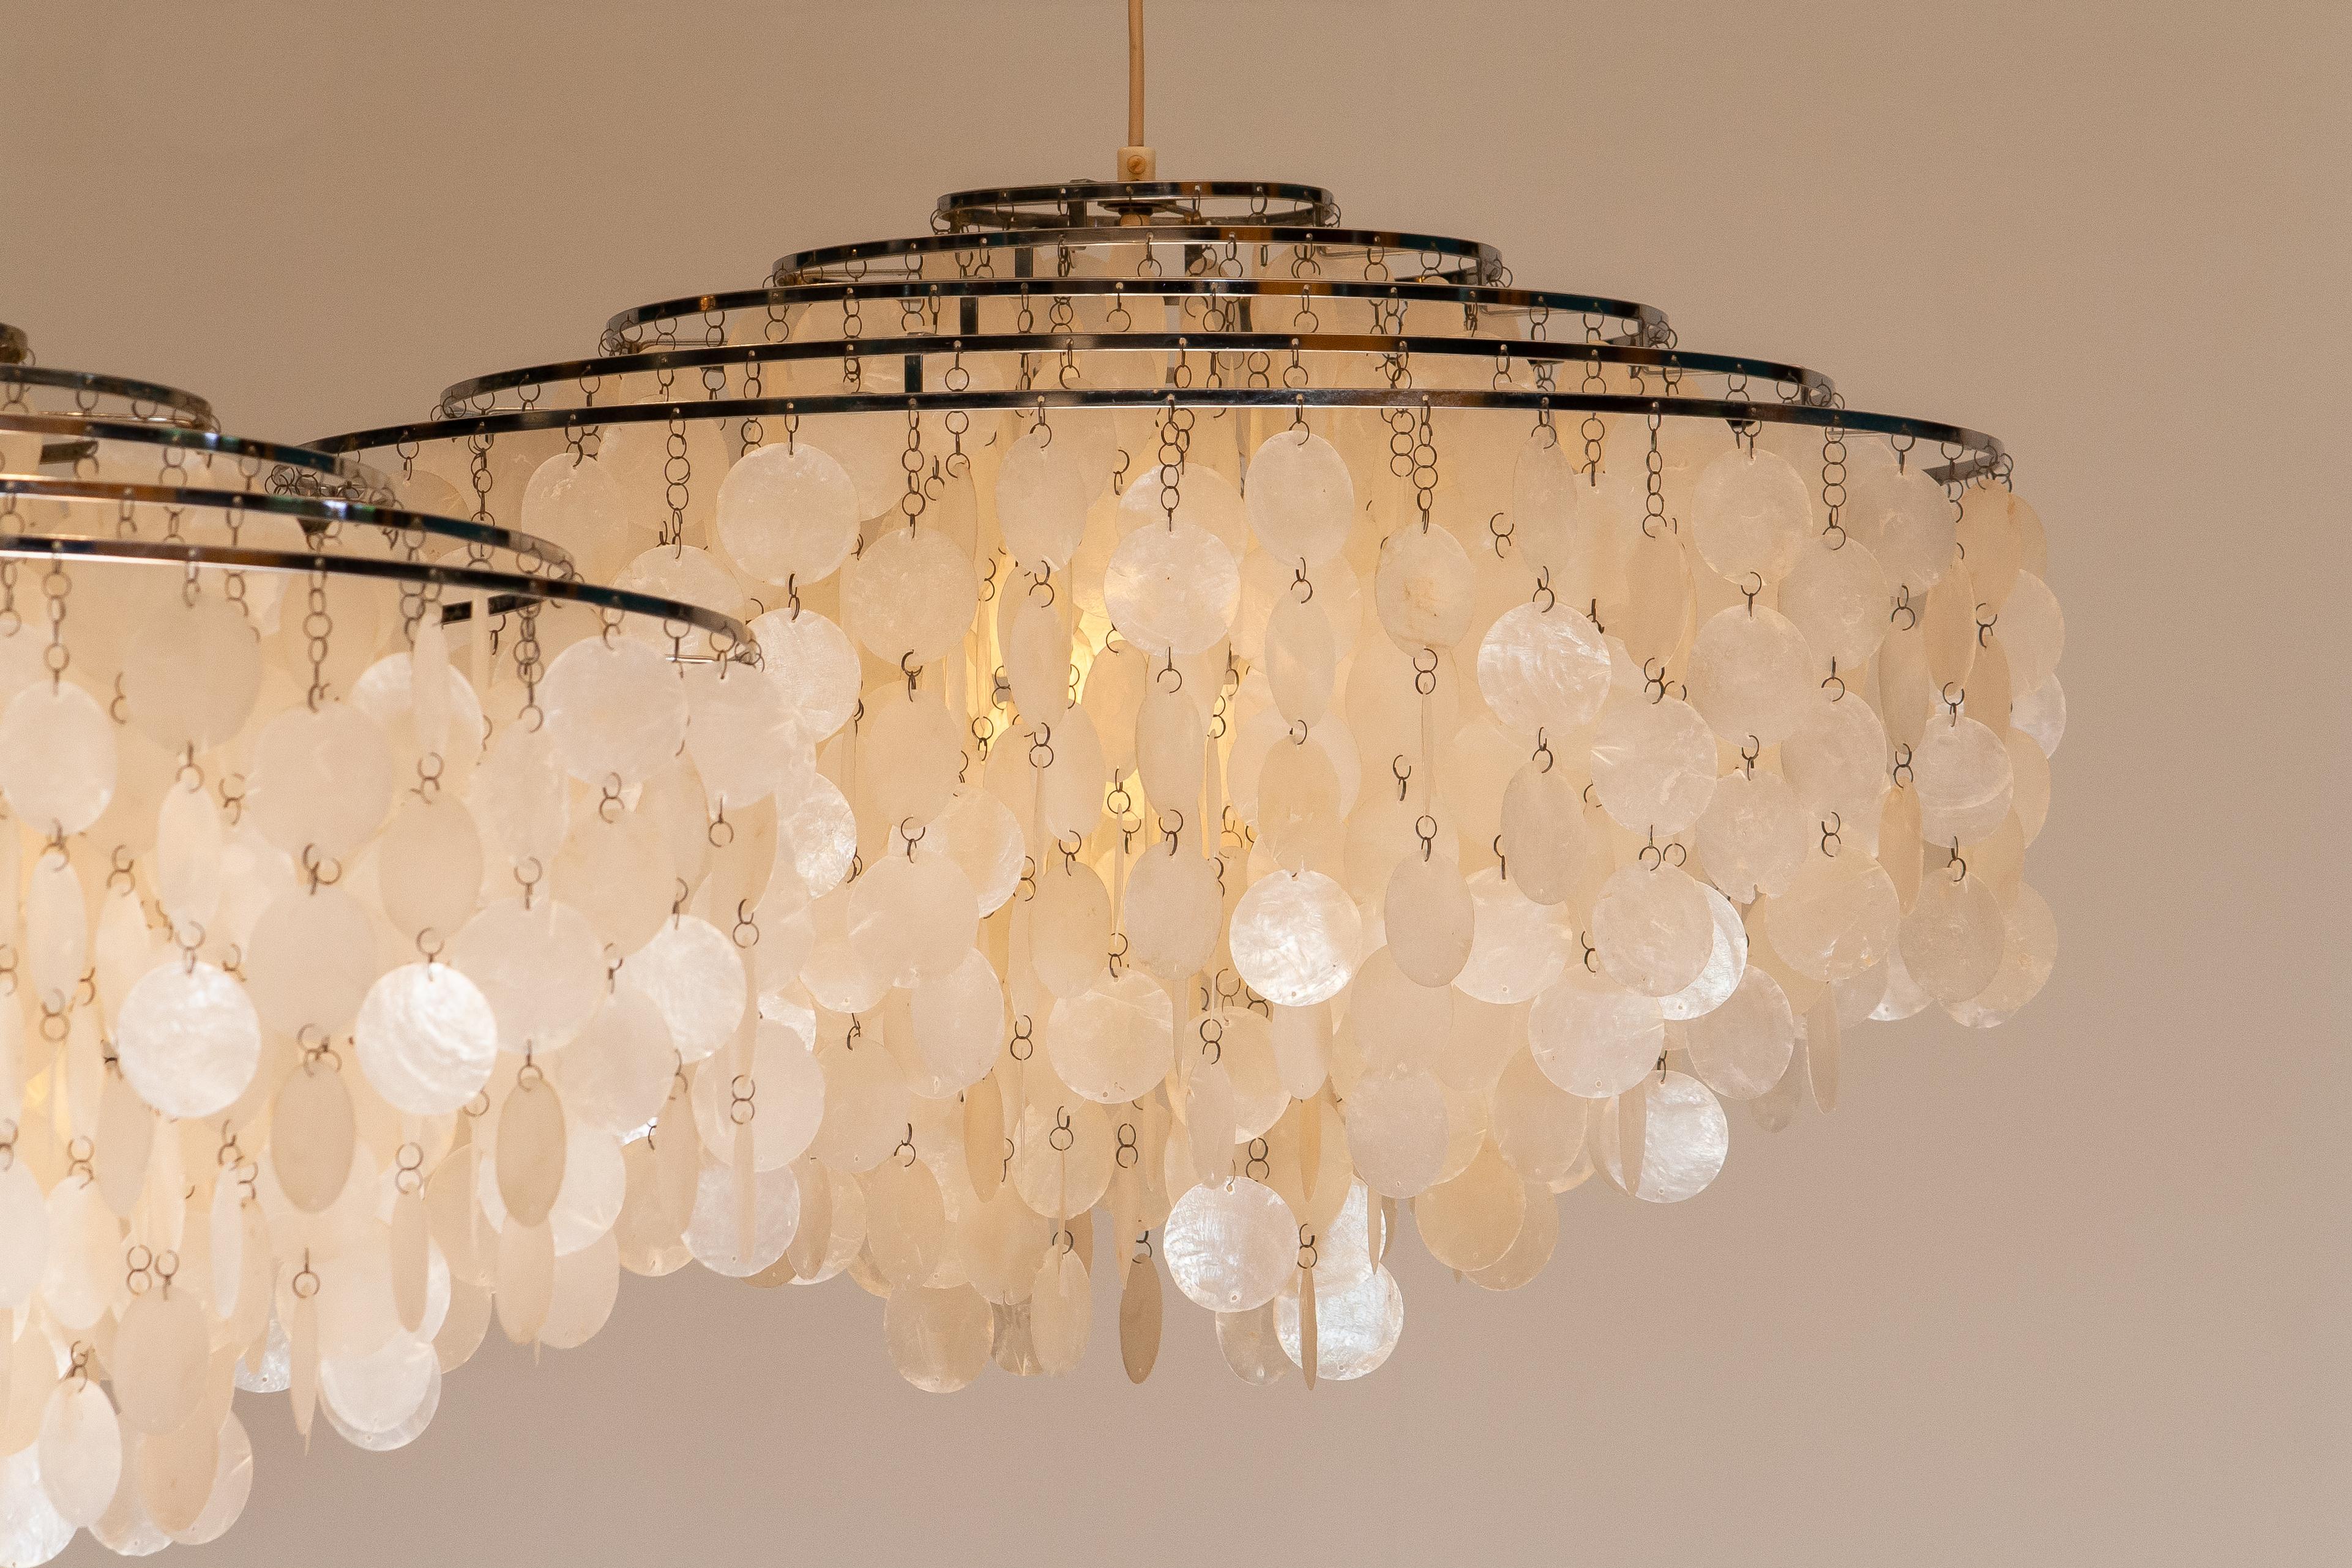 Scandinavian Modern Pair of Extra Large Capiz Shell Chandeliers by Verner Panton for Luber AG. Swiss